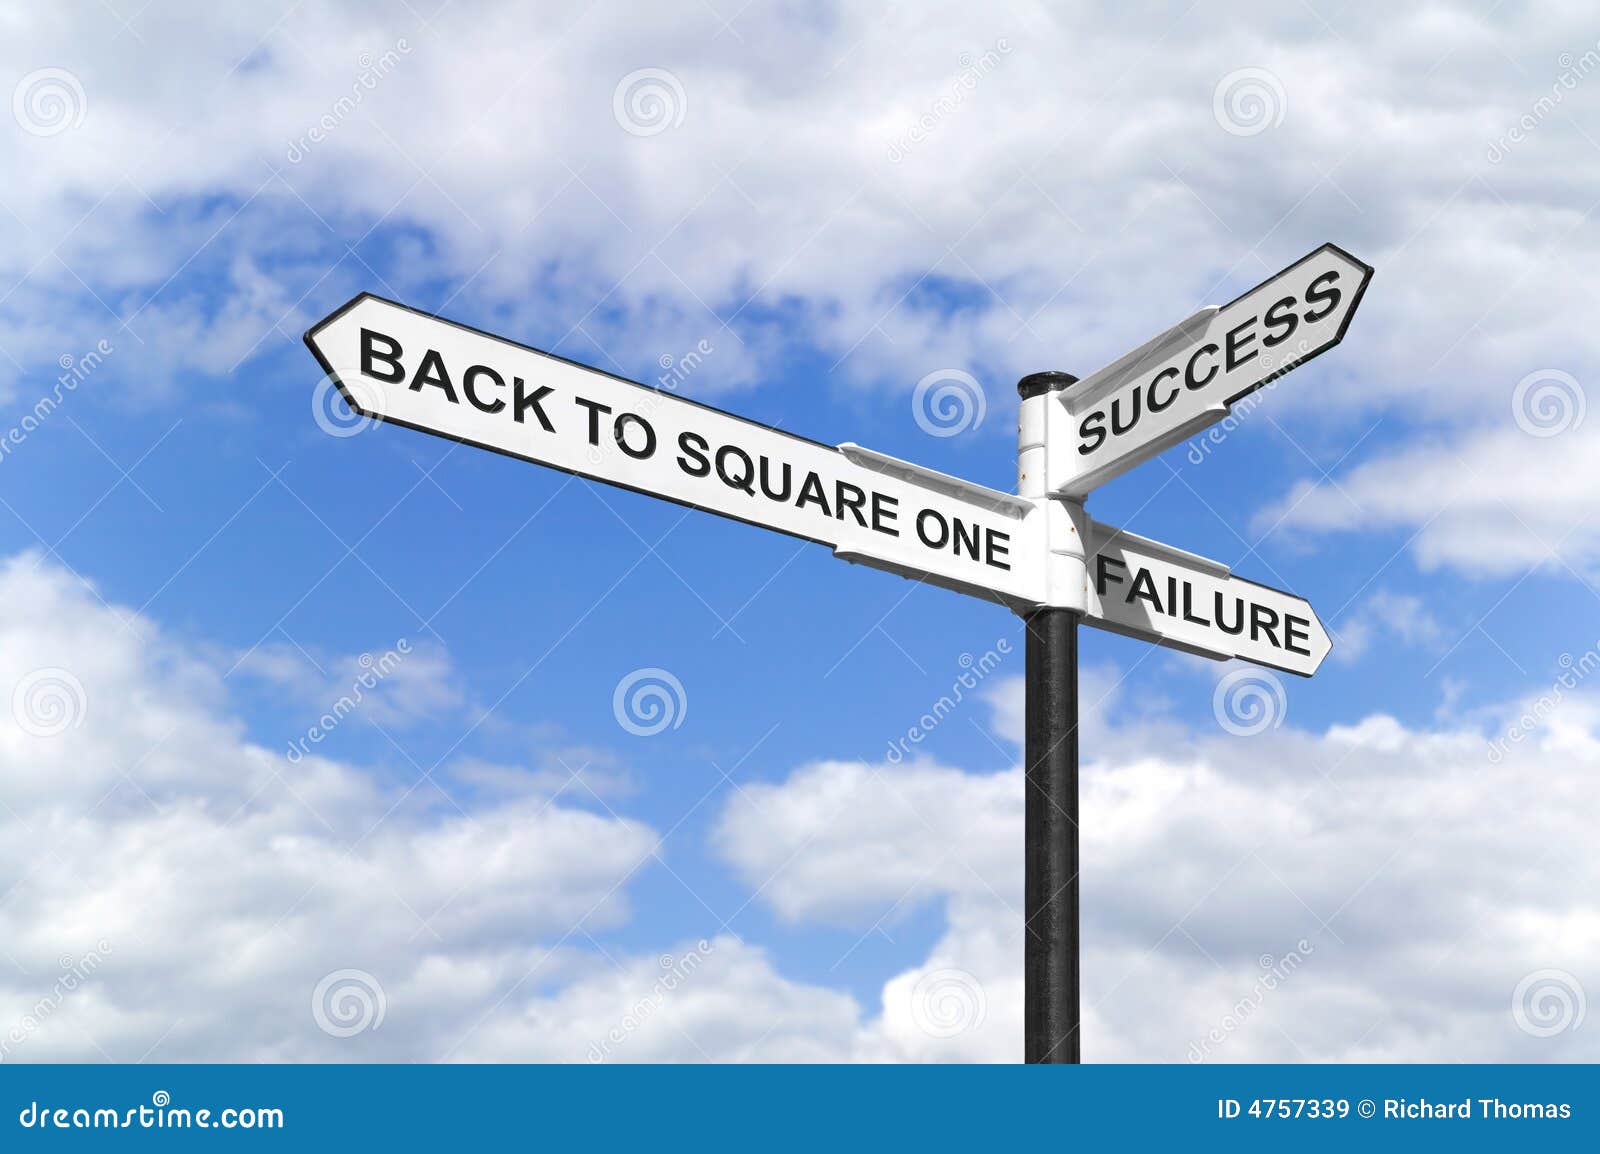 632 Back To Square One Photos Free Royalty Free Stock Photos From Dreamstime